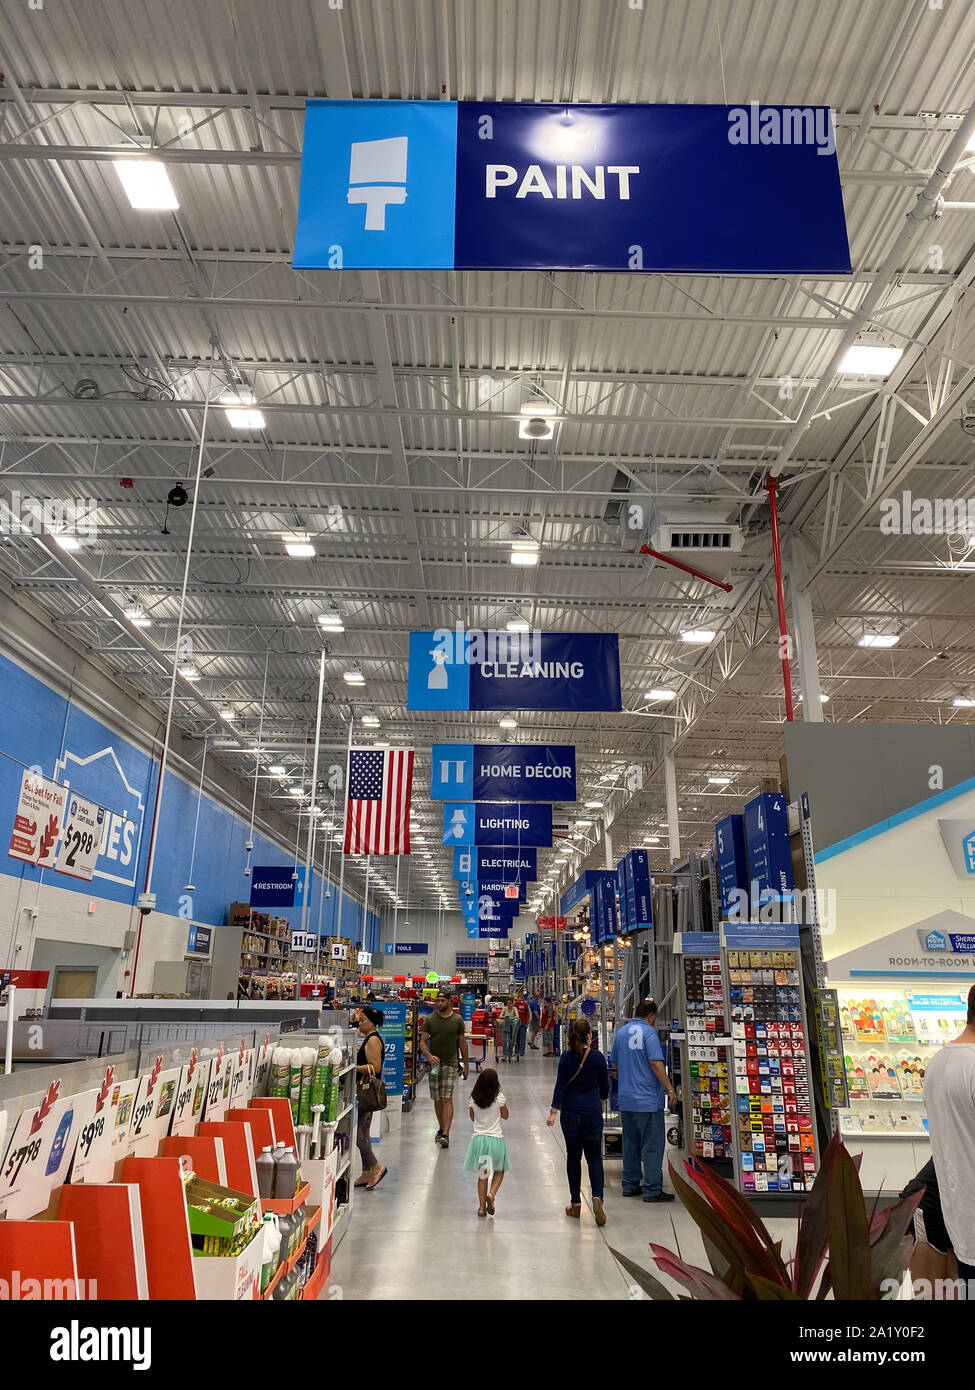 Orlando,FL/USA-9/28/19: The signs hanging from the ceiling at Lowes home improvement store that designate what departments are in the aisle while peop Stock Photo